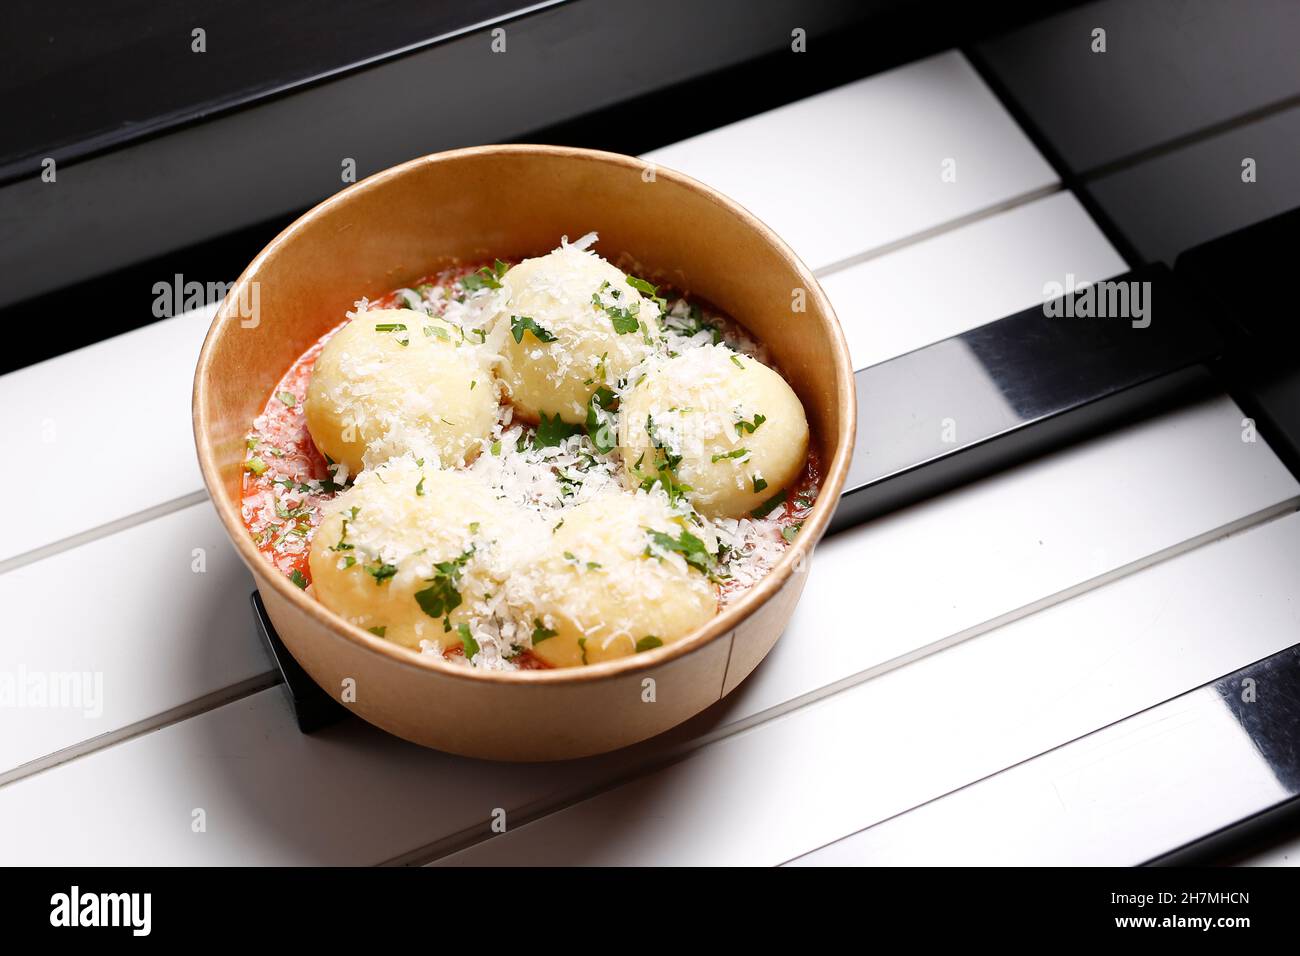 Gnocchi di patate, potato dumplings with tomato sauce, and Parmesan cheese. Takeaway, diet box. Appetizing ready-to-go dish served in a disposable bo Stock Photo